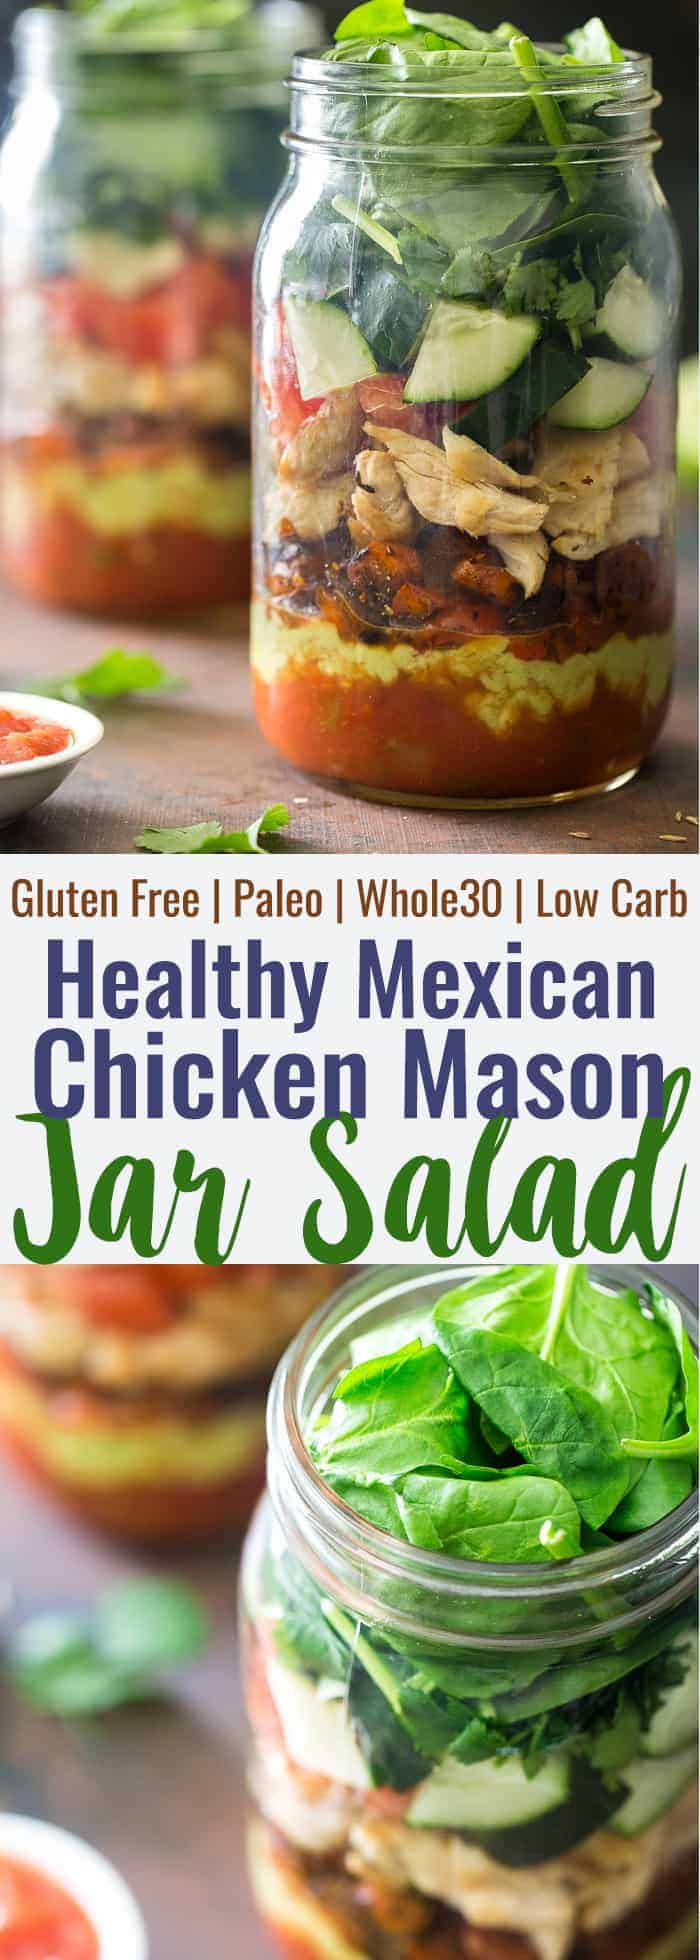 Healthy Taco Salad Recipe - Low carb, gluten free and Paleo friendly! It's served in a mason jar for a portable, easy lunch, that wont get soggy! | #Foodfaithfitness | #Glutenfree #Paleo #Lowcarb #Whole30 #mealprep